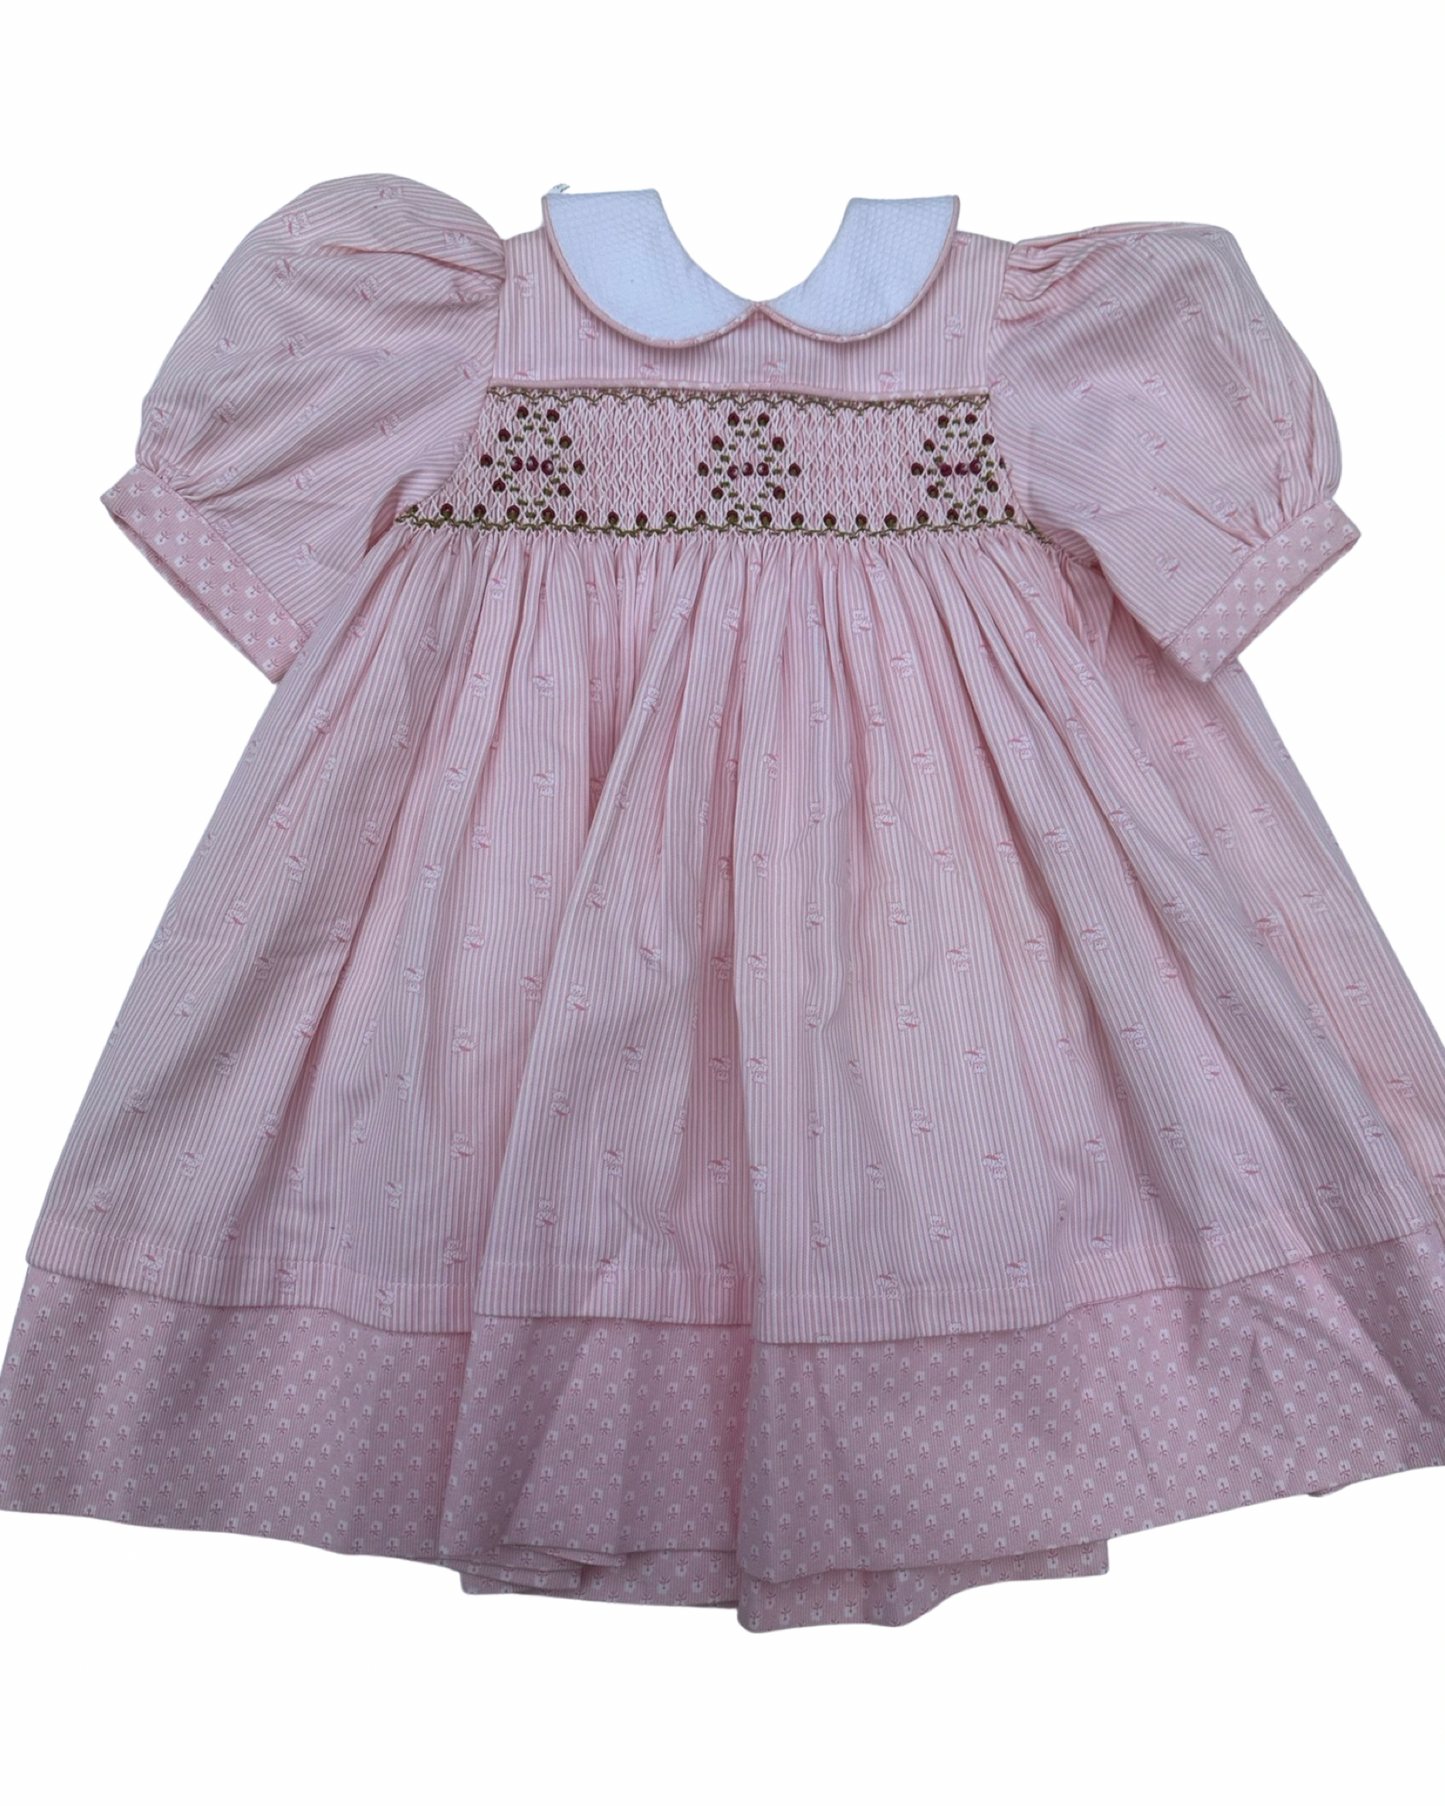 Handmade smocked cotton dress in pale pink (size 2-3yrs)